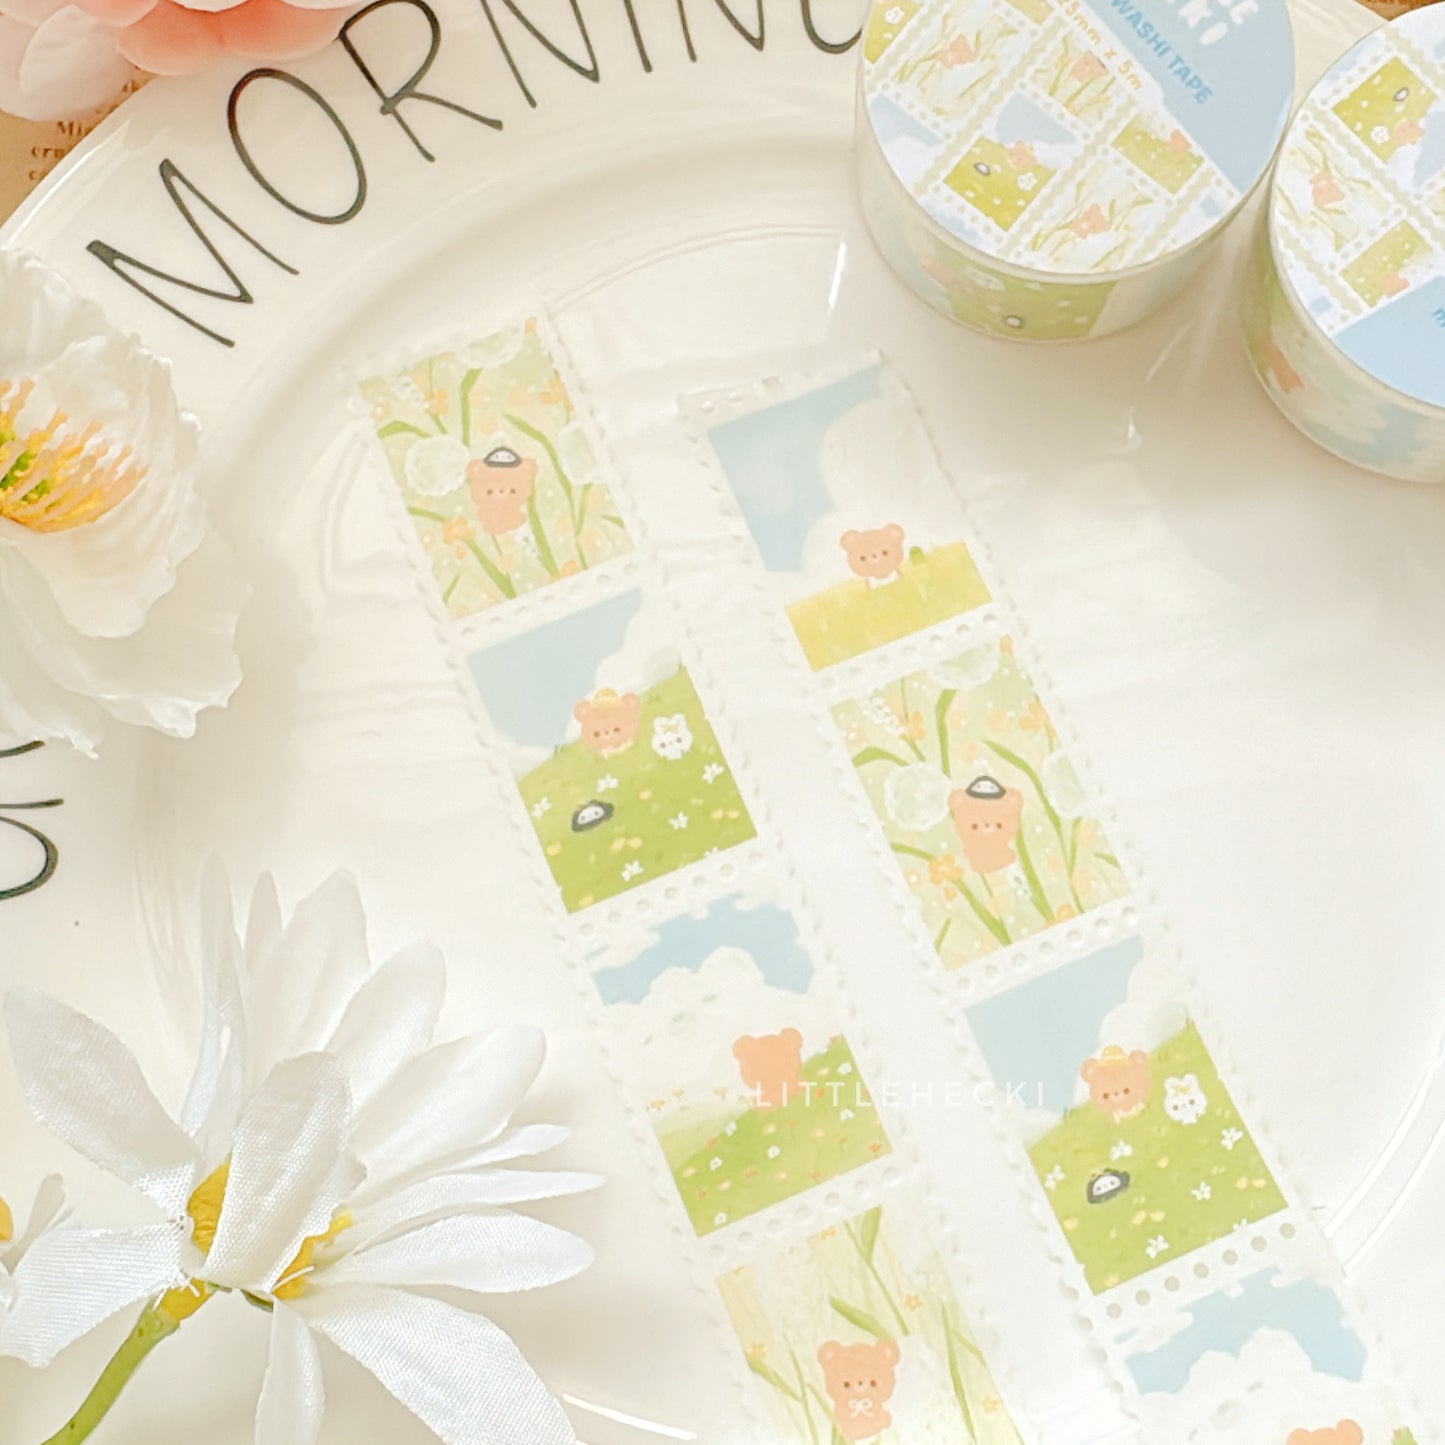 Clear Day Beary Stamp Washi Tape